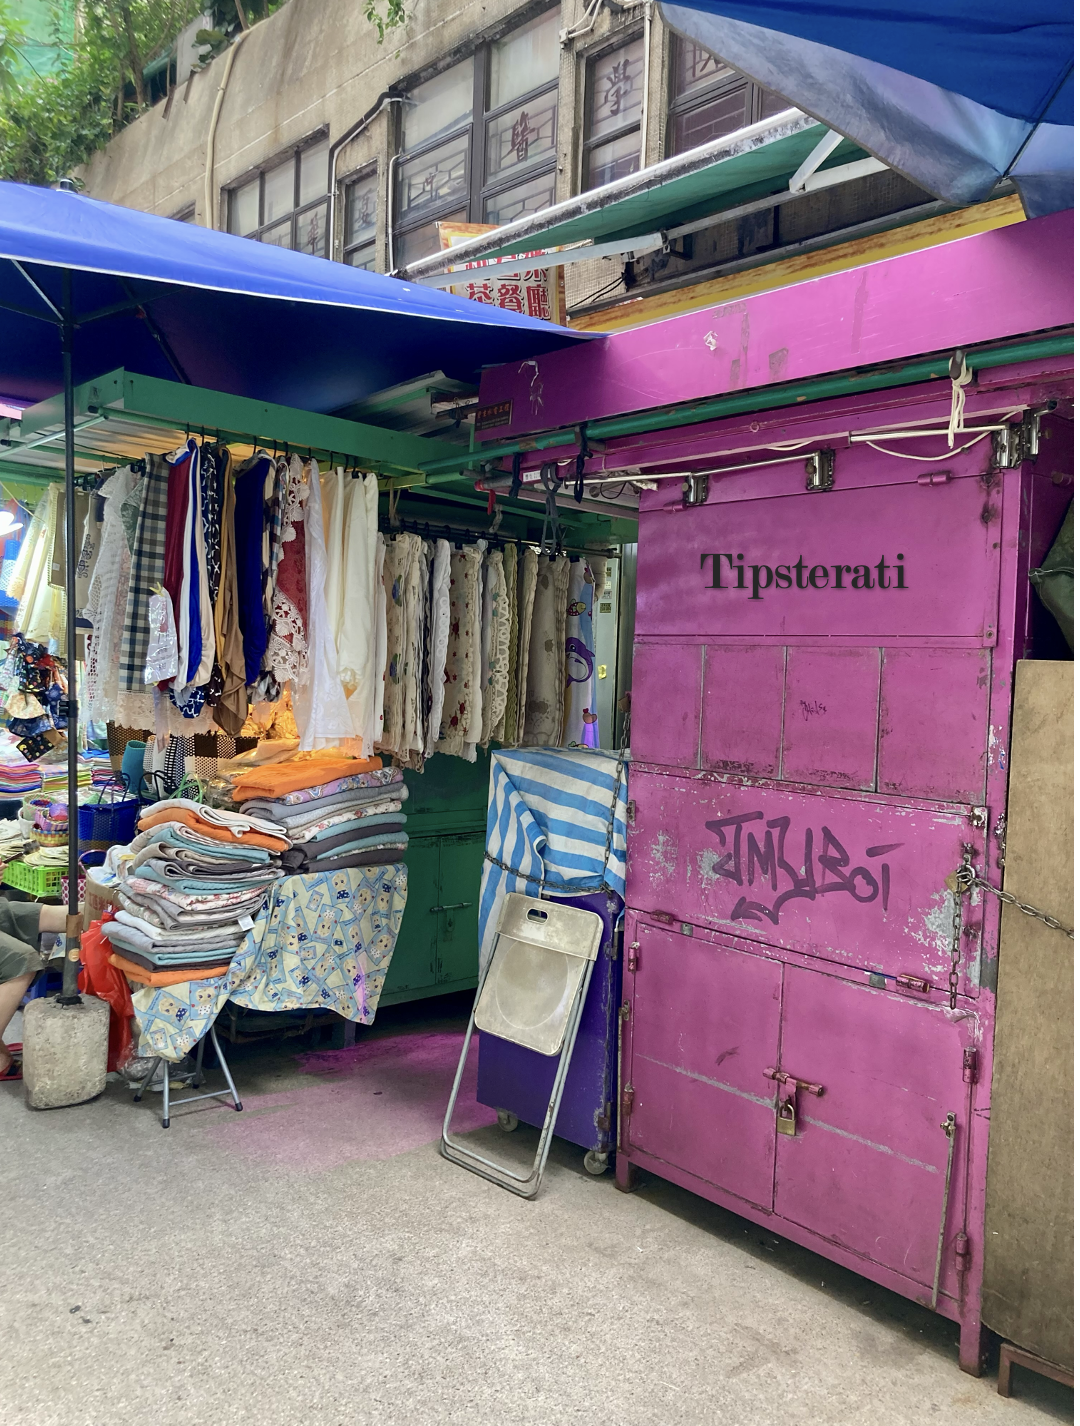 A shuttered street stall (in purple) stands next to another selling towels and blankets.